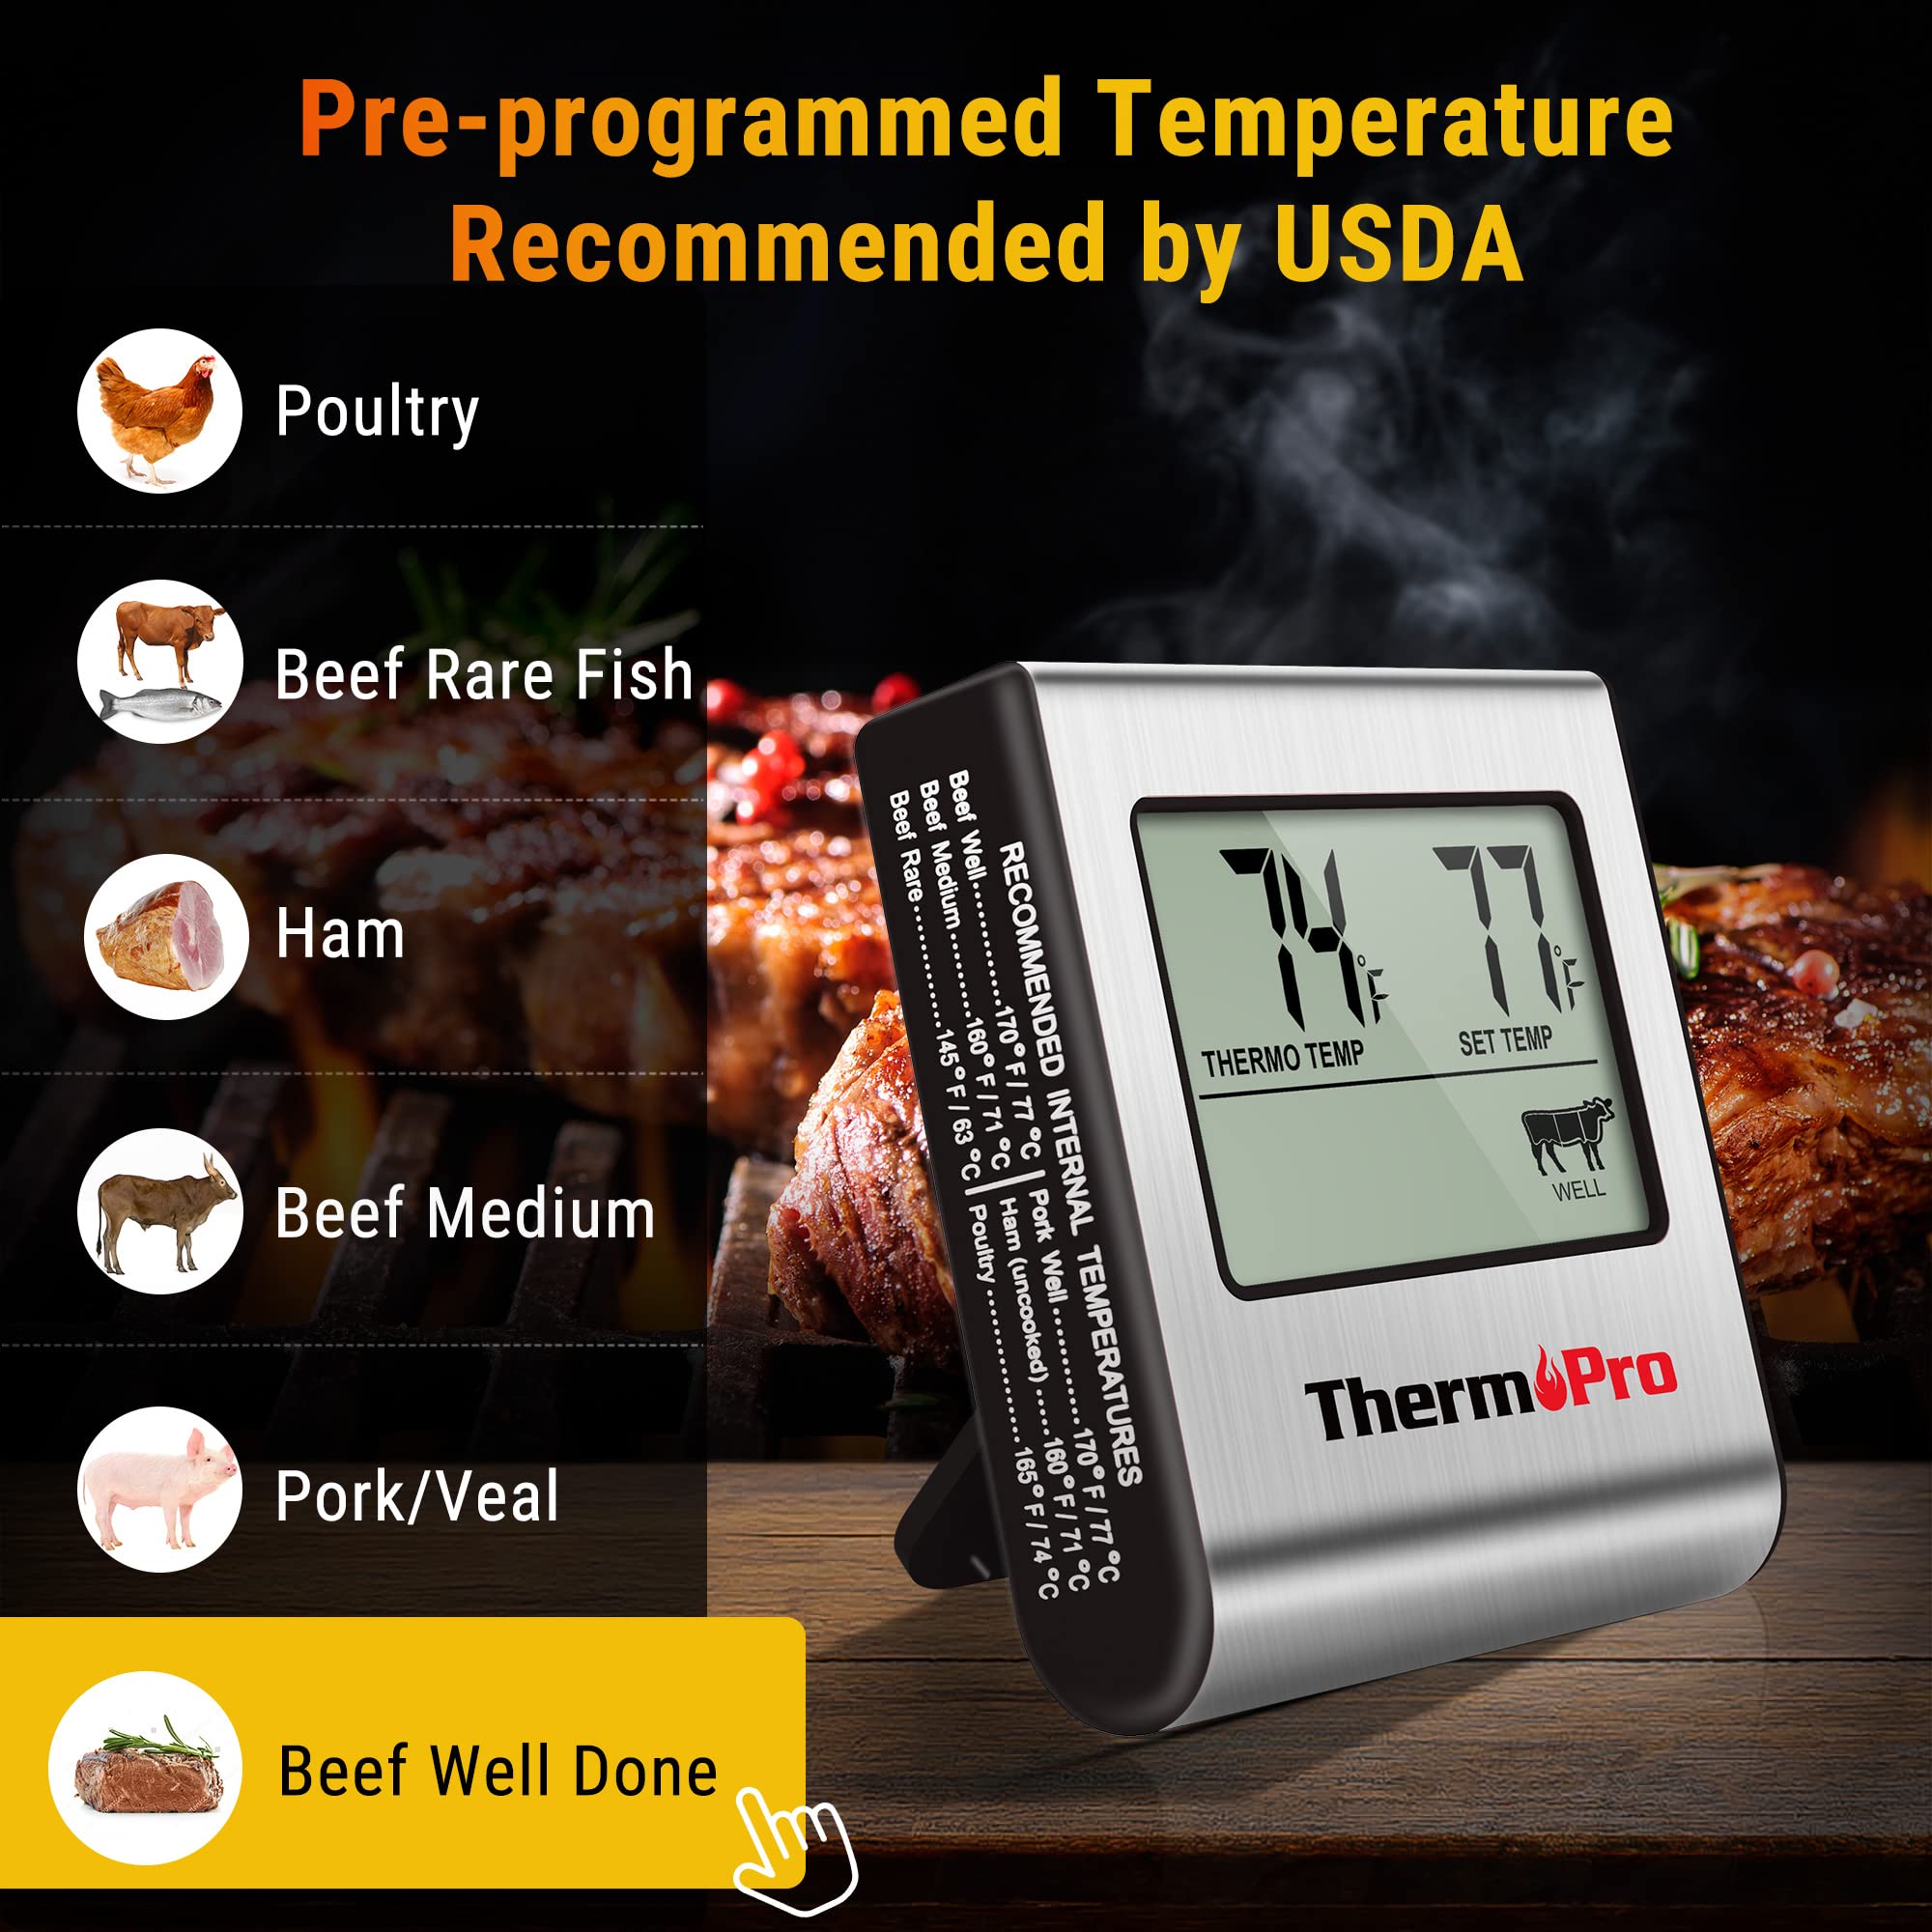 ThermoPro TP-16 Large LCD Digital Cooking Food Meat Smoker Oven Kitchen BBQ Grill Thermometer Clock Timer with Stainless Steel Probe